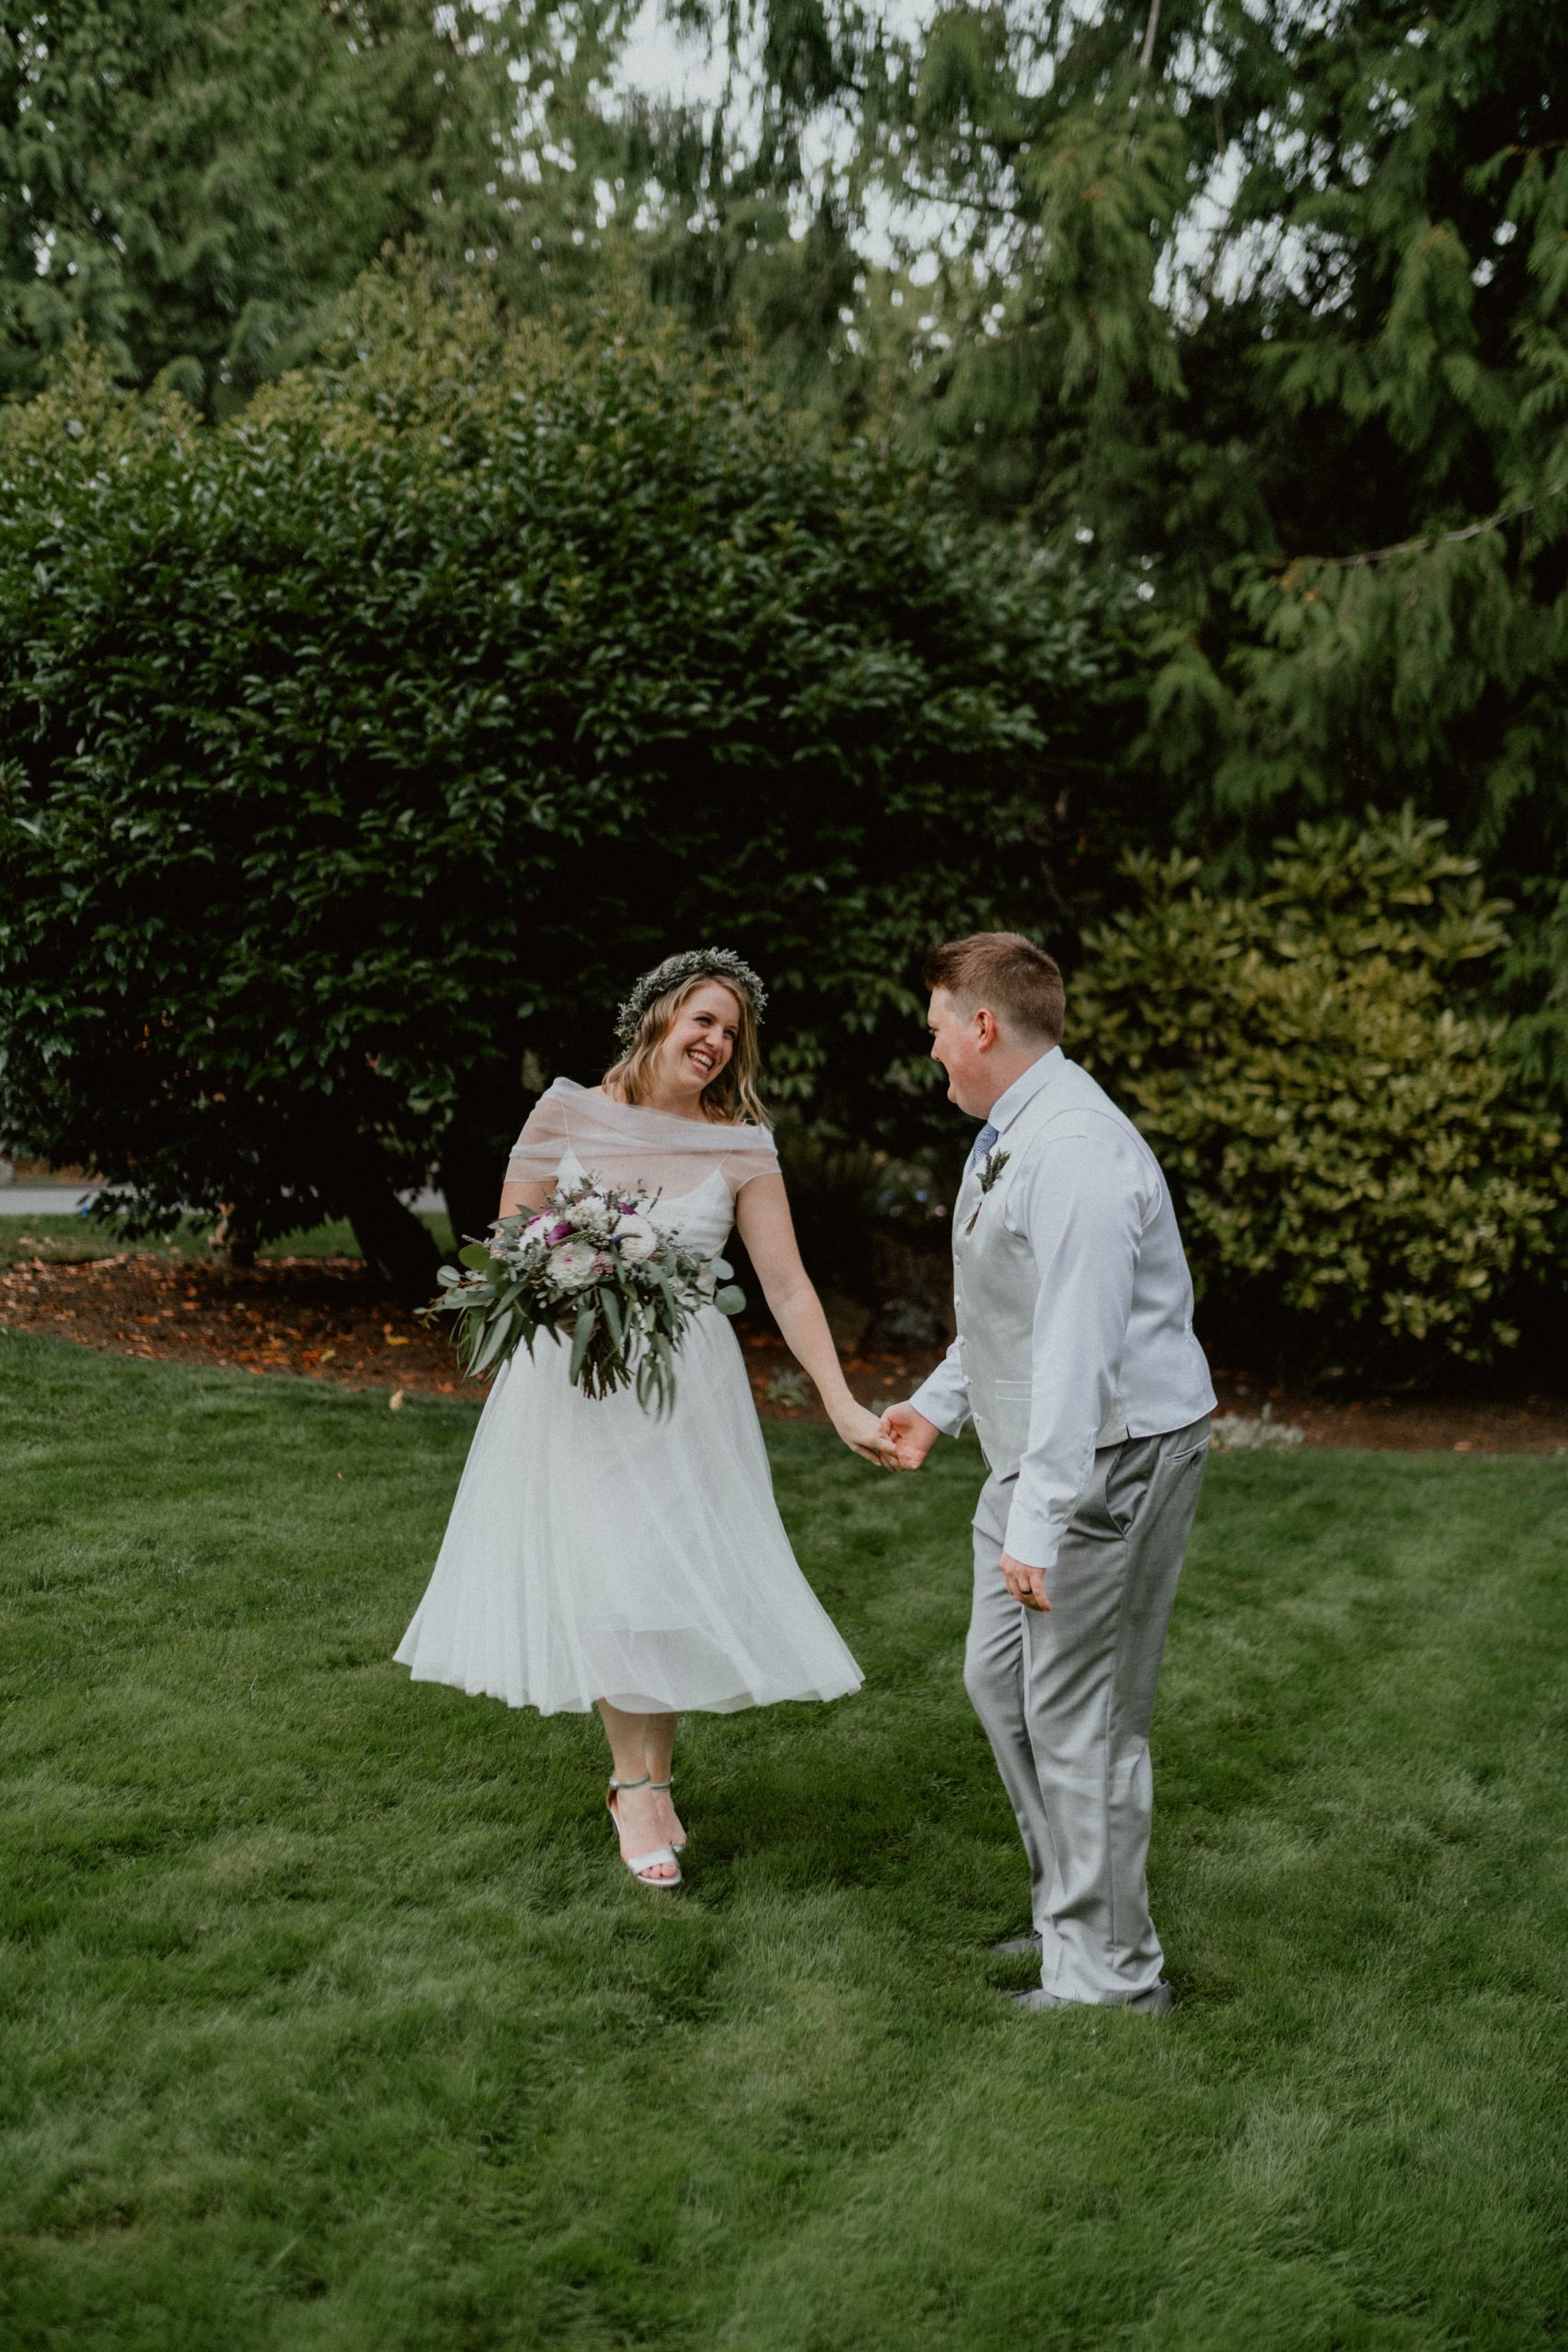 Bride and Groom pose and kiss with their rings after they say wedding vows in intimate backyard elopement | Seattle Wedding Photographer, Seattle Elopement Photographer | chelseaabril.com